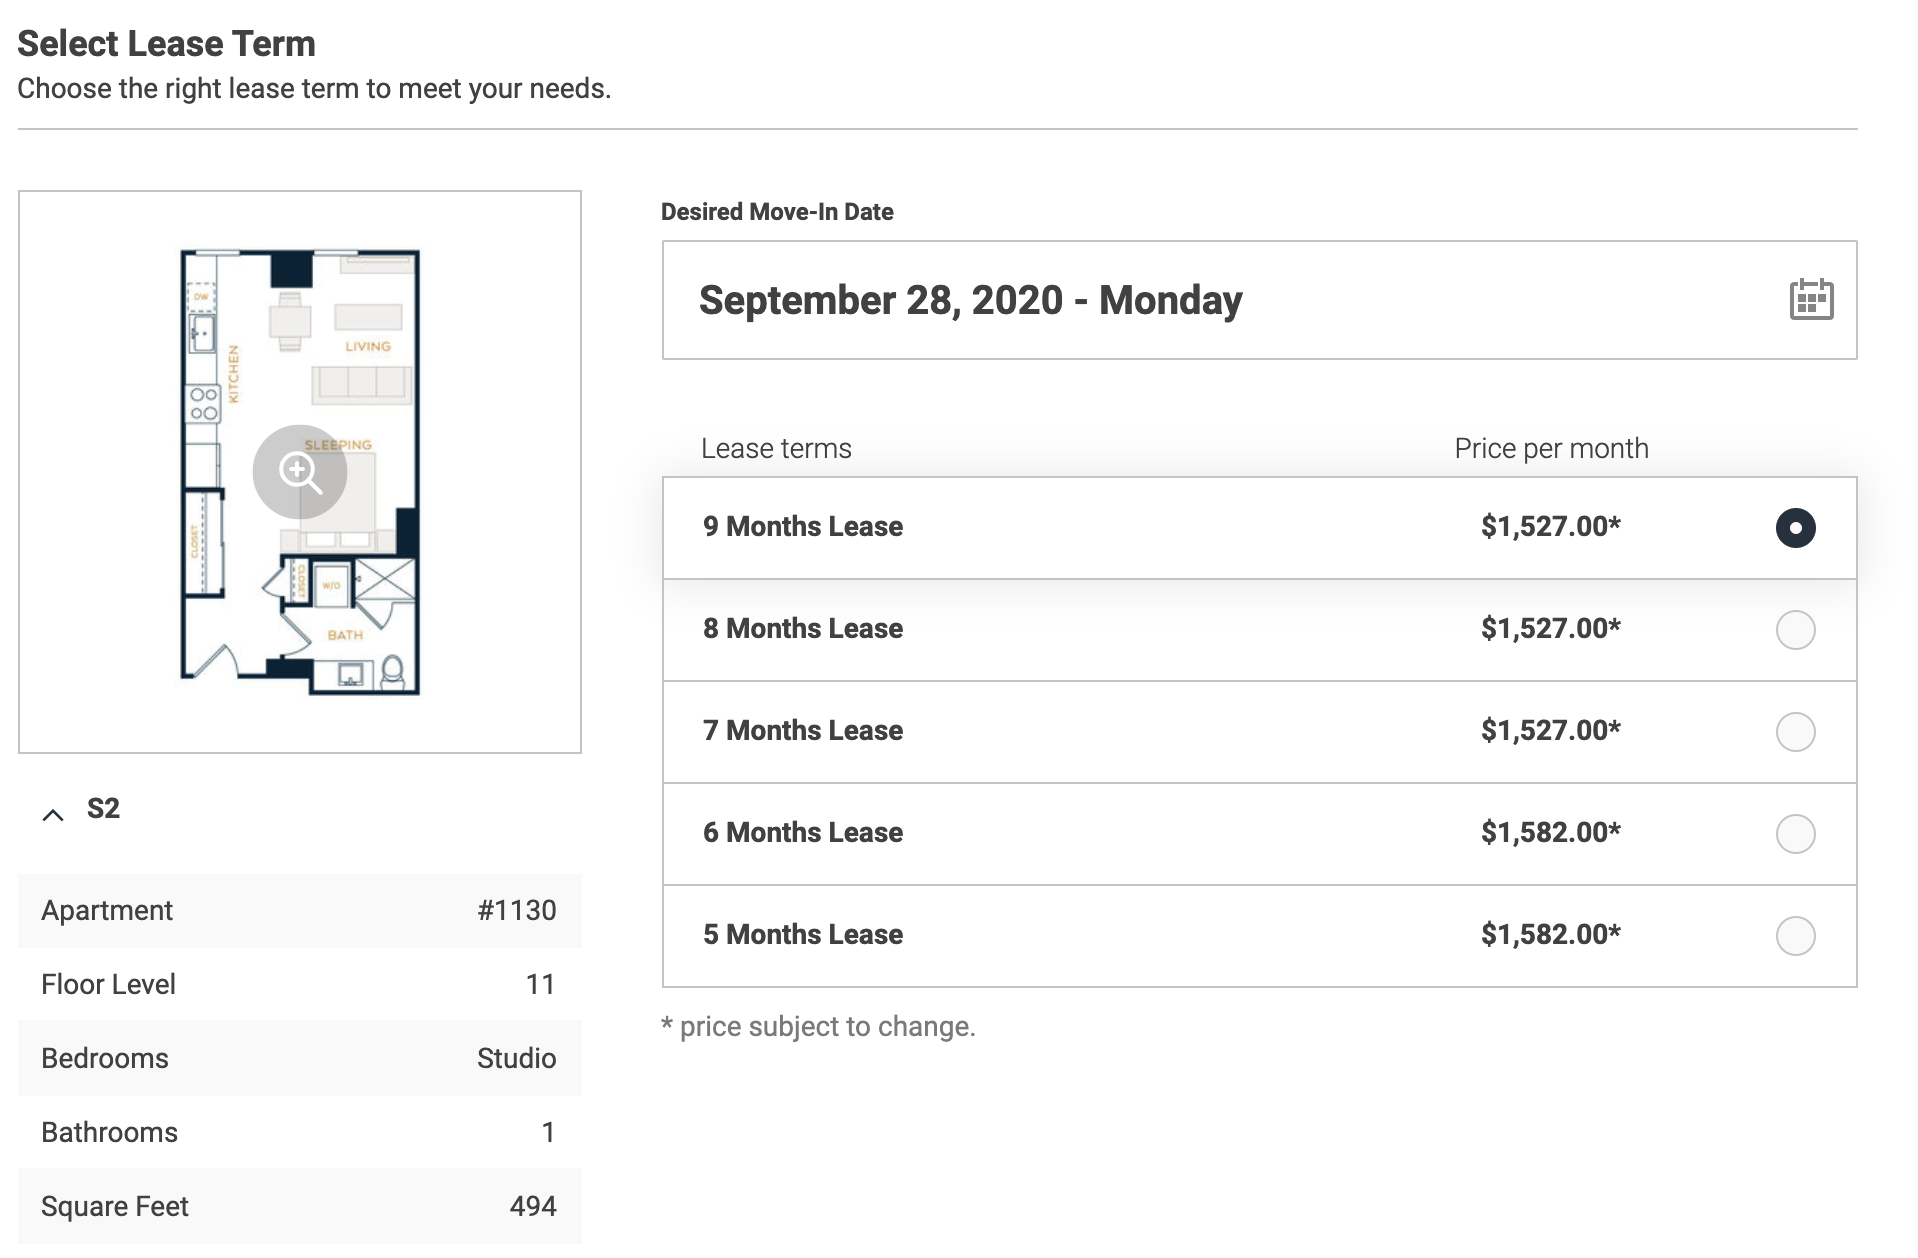 A screenshot of functionality to select an apartment lease term with a floor plan, a desired move-in date, and radio buttons for different lease terms ranging from 9 months to 5 months.